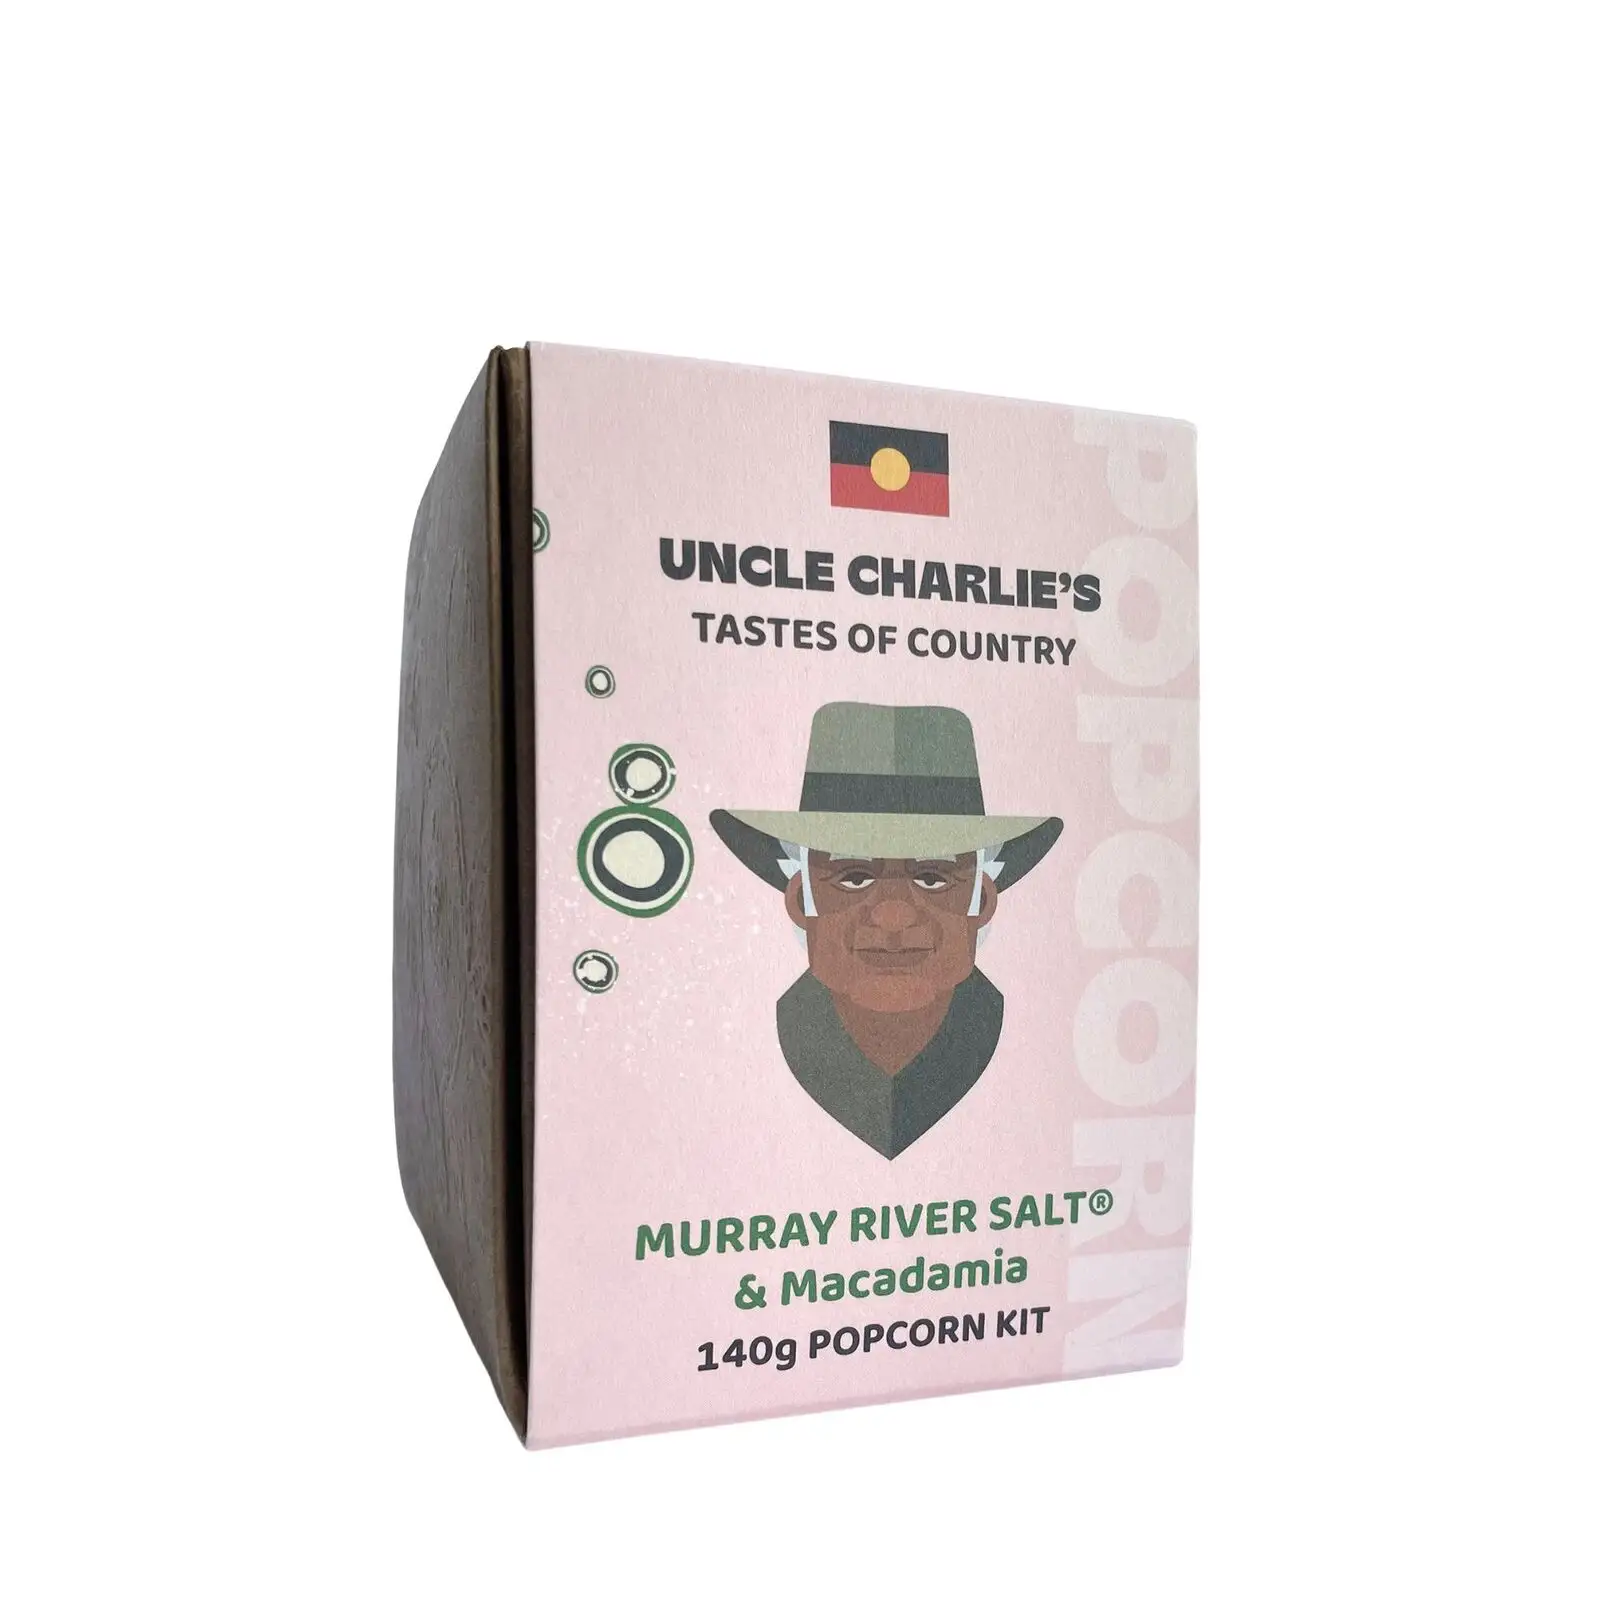 Uncle Charlie's Tastes of Country Popcorn Kit Small Murray River Salt & Macadamia (140g)